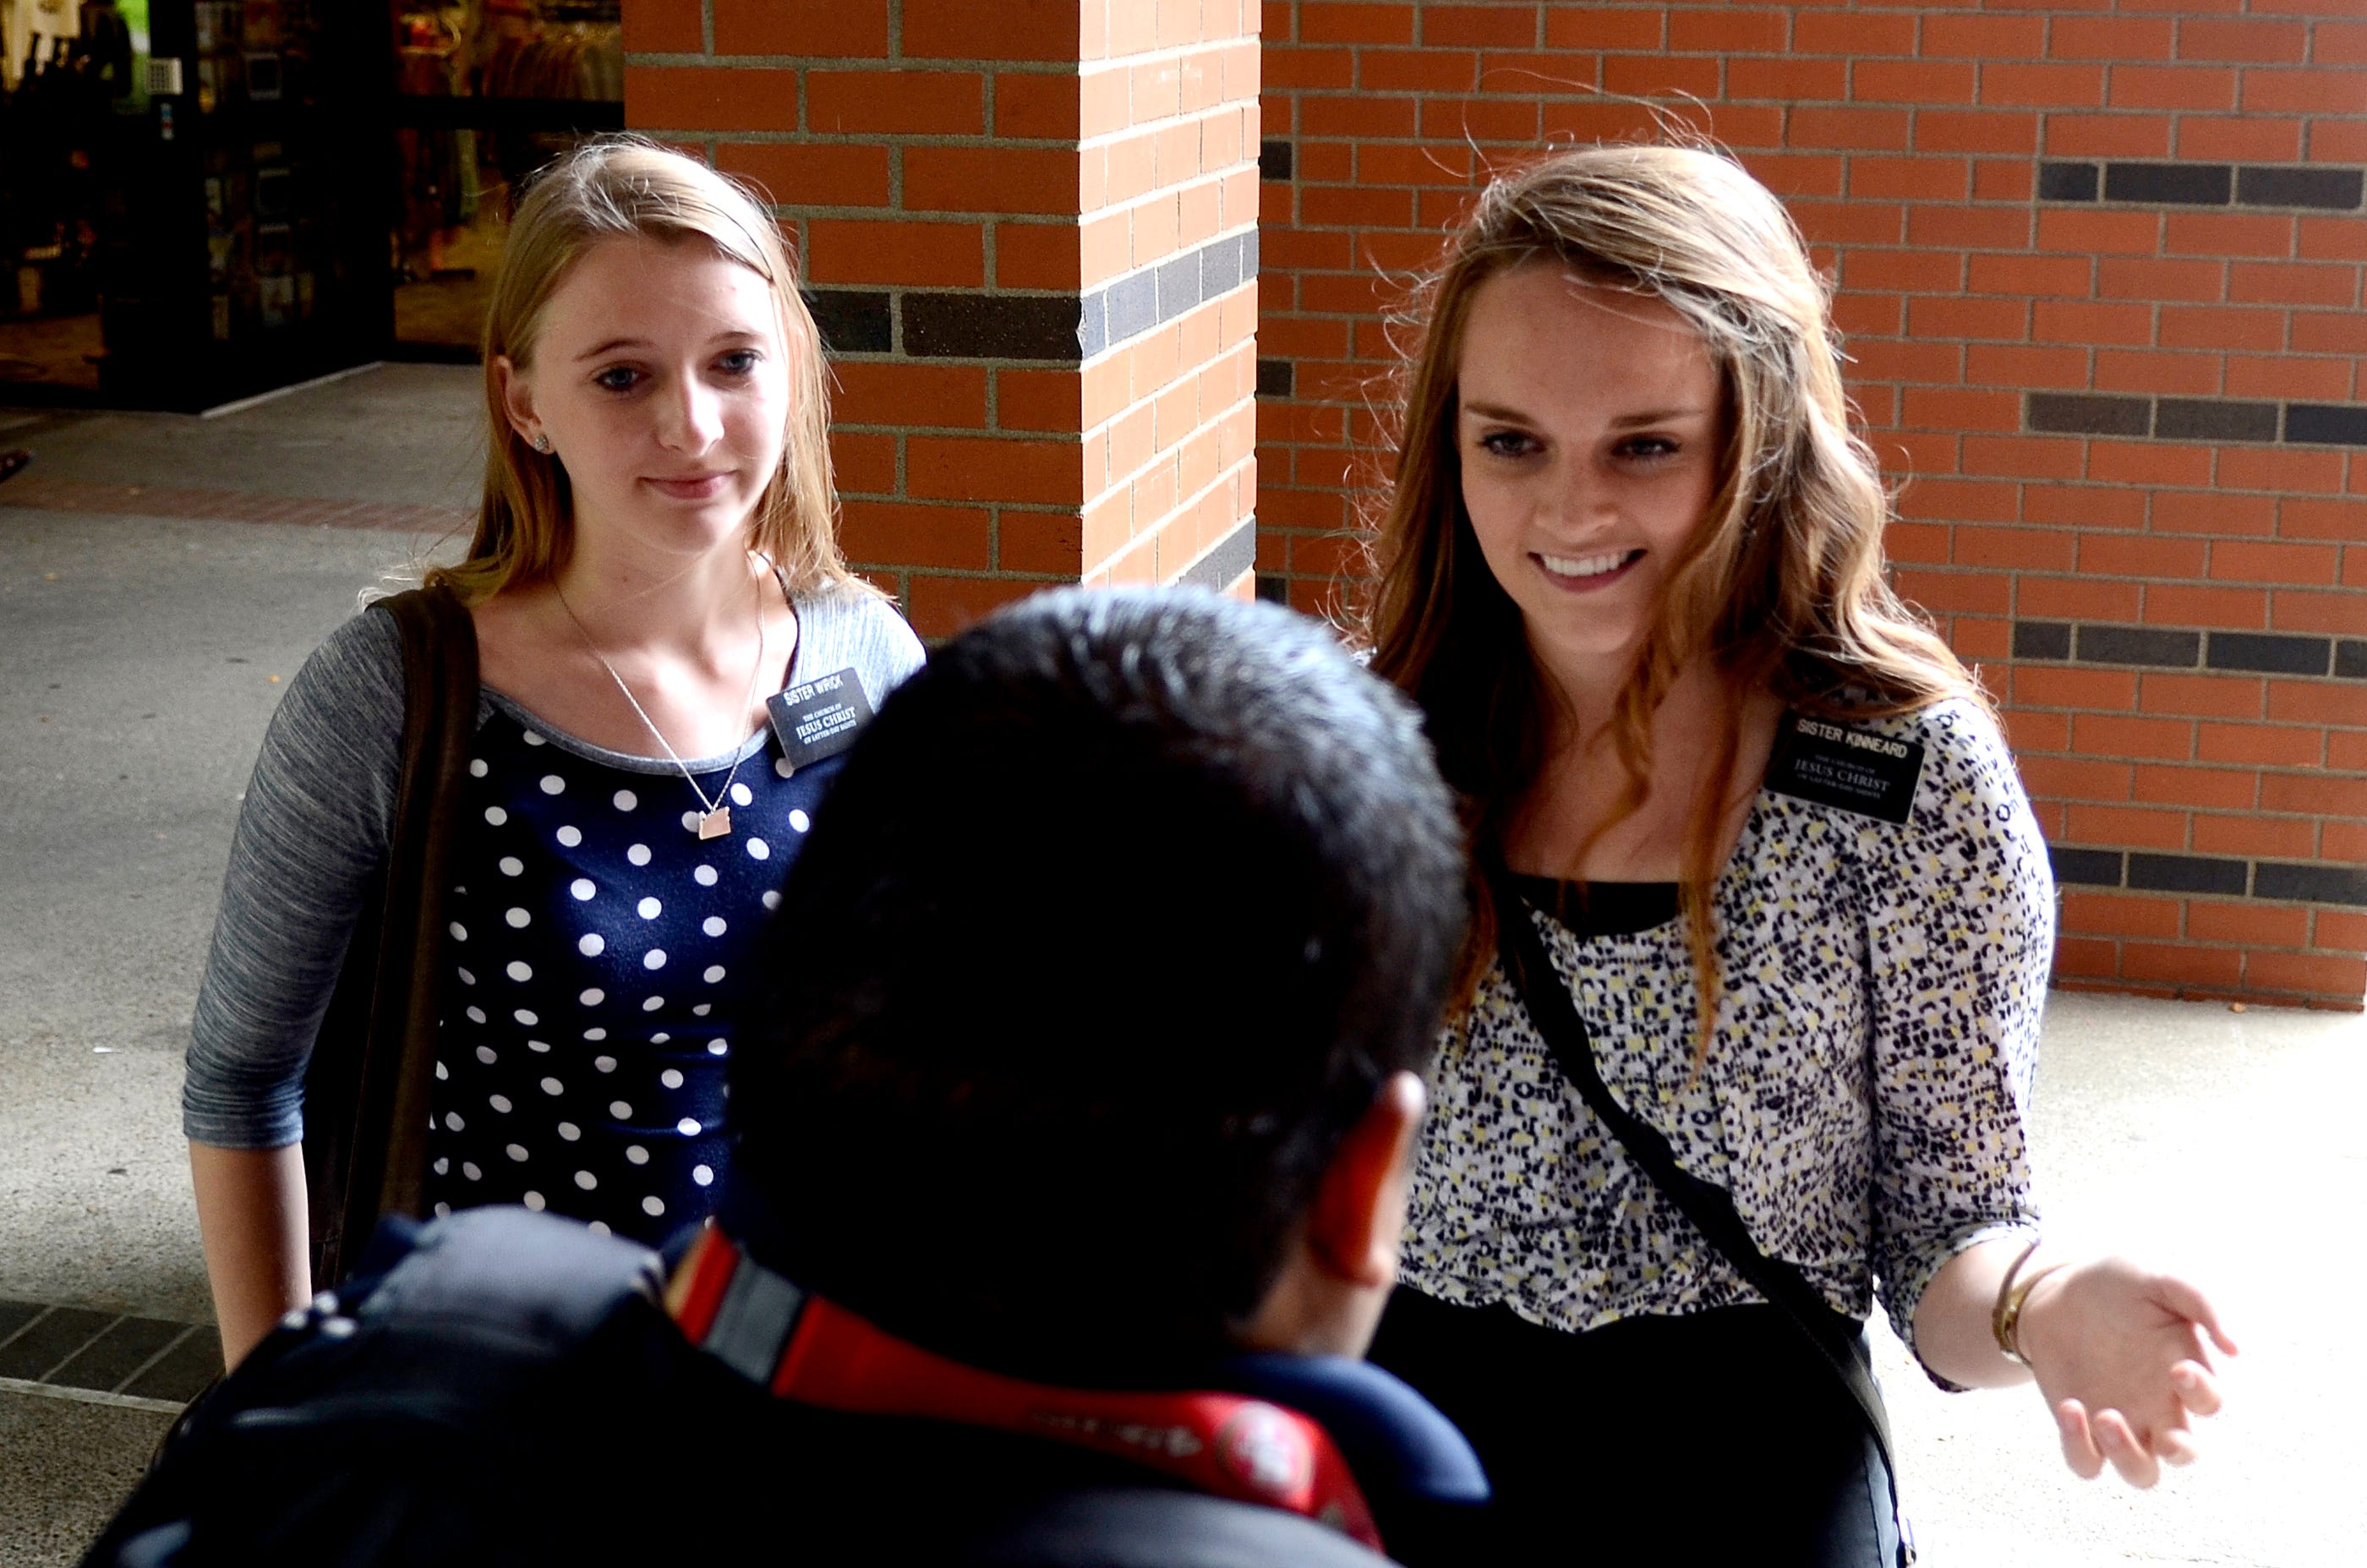 Go Behind The Scenes With Female Mormon Missionaries 5162